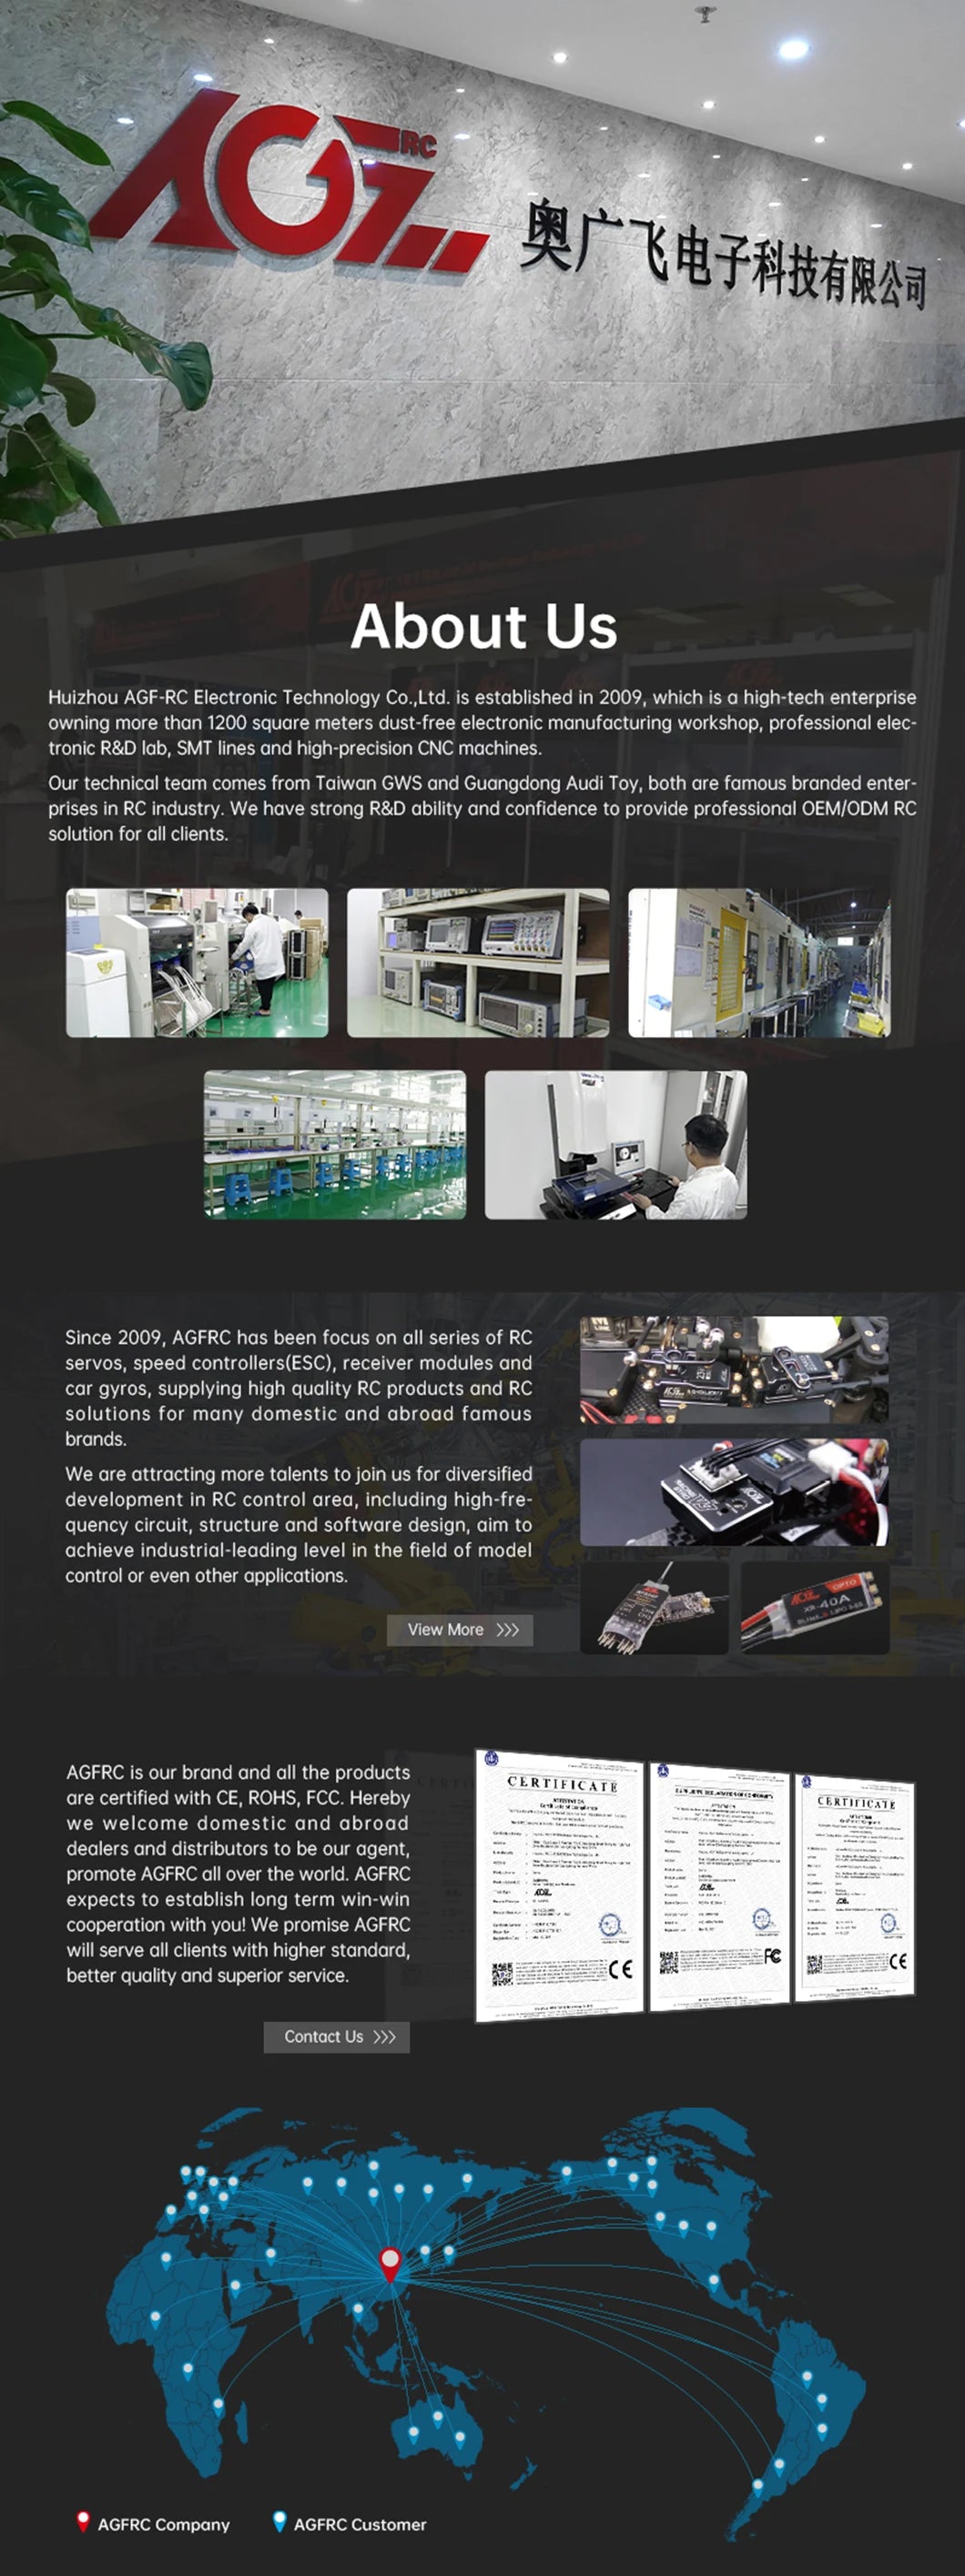 AGFRC B53DHS, Huizhou AGF-RC Electronic Technology Co,Ltd. is established in 2009